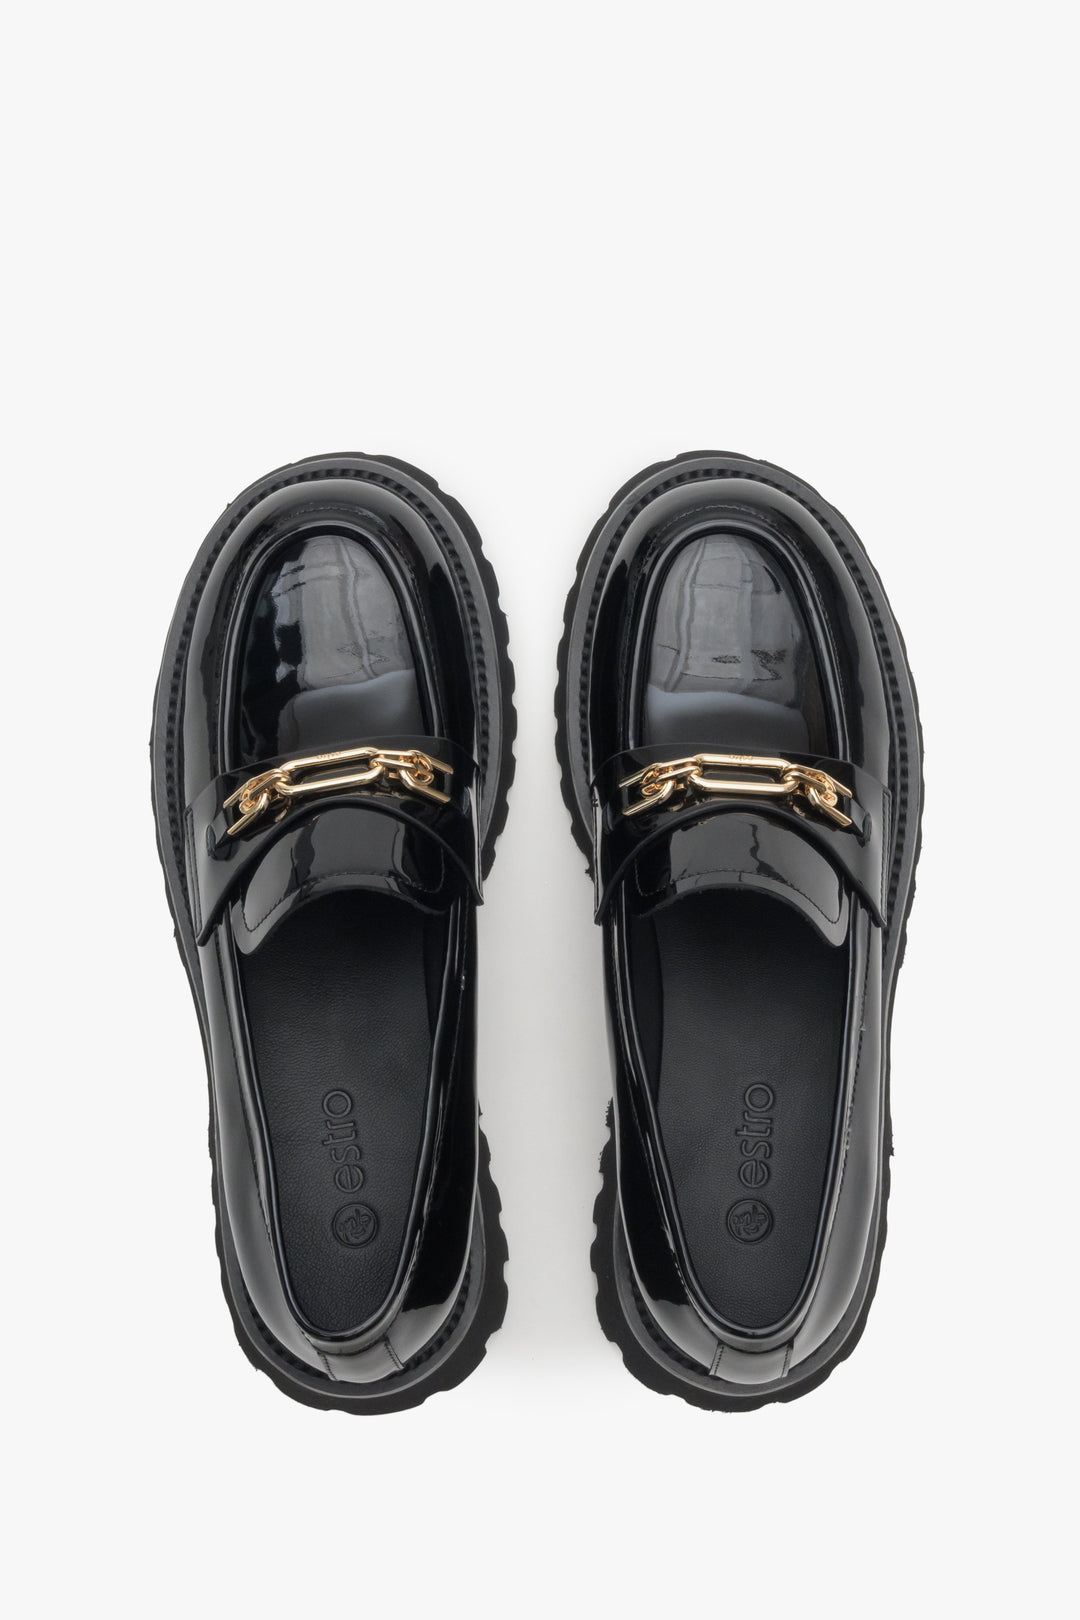 Women's black leather moccasins by Estro - top view presentation of the model.